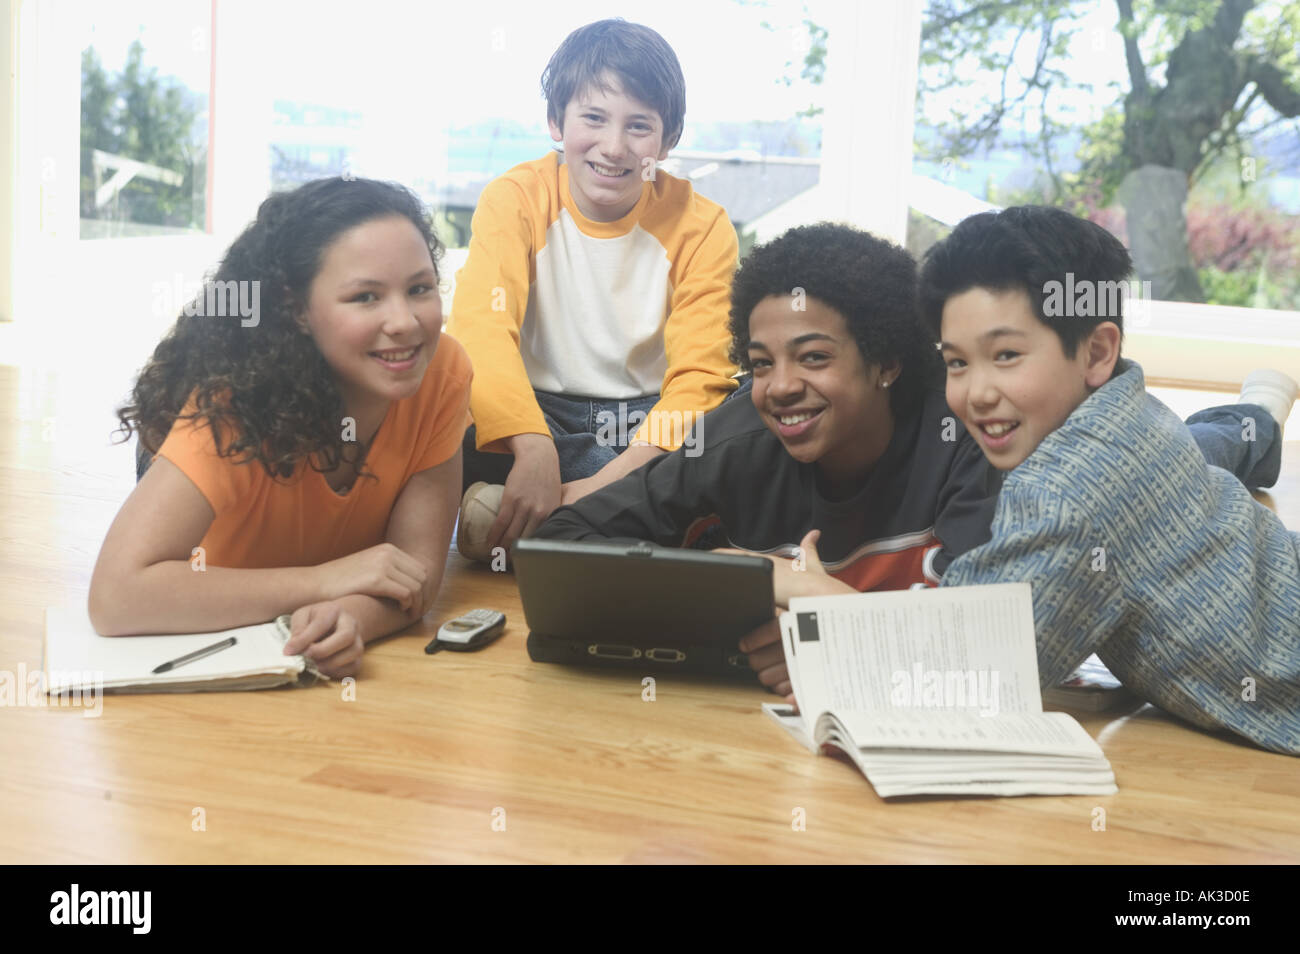 Four teenage kids working on a laptop and school books Stock Photo